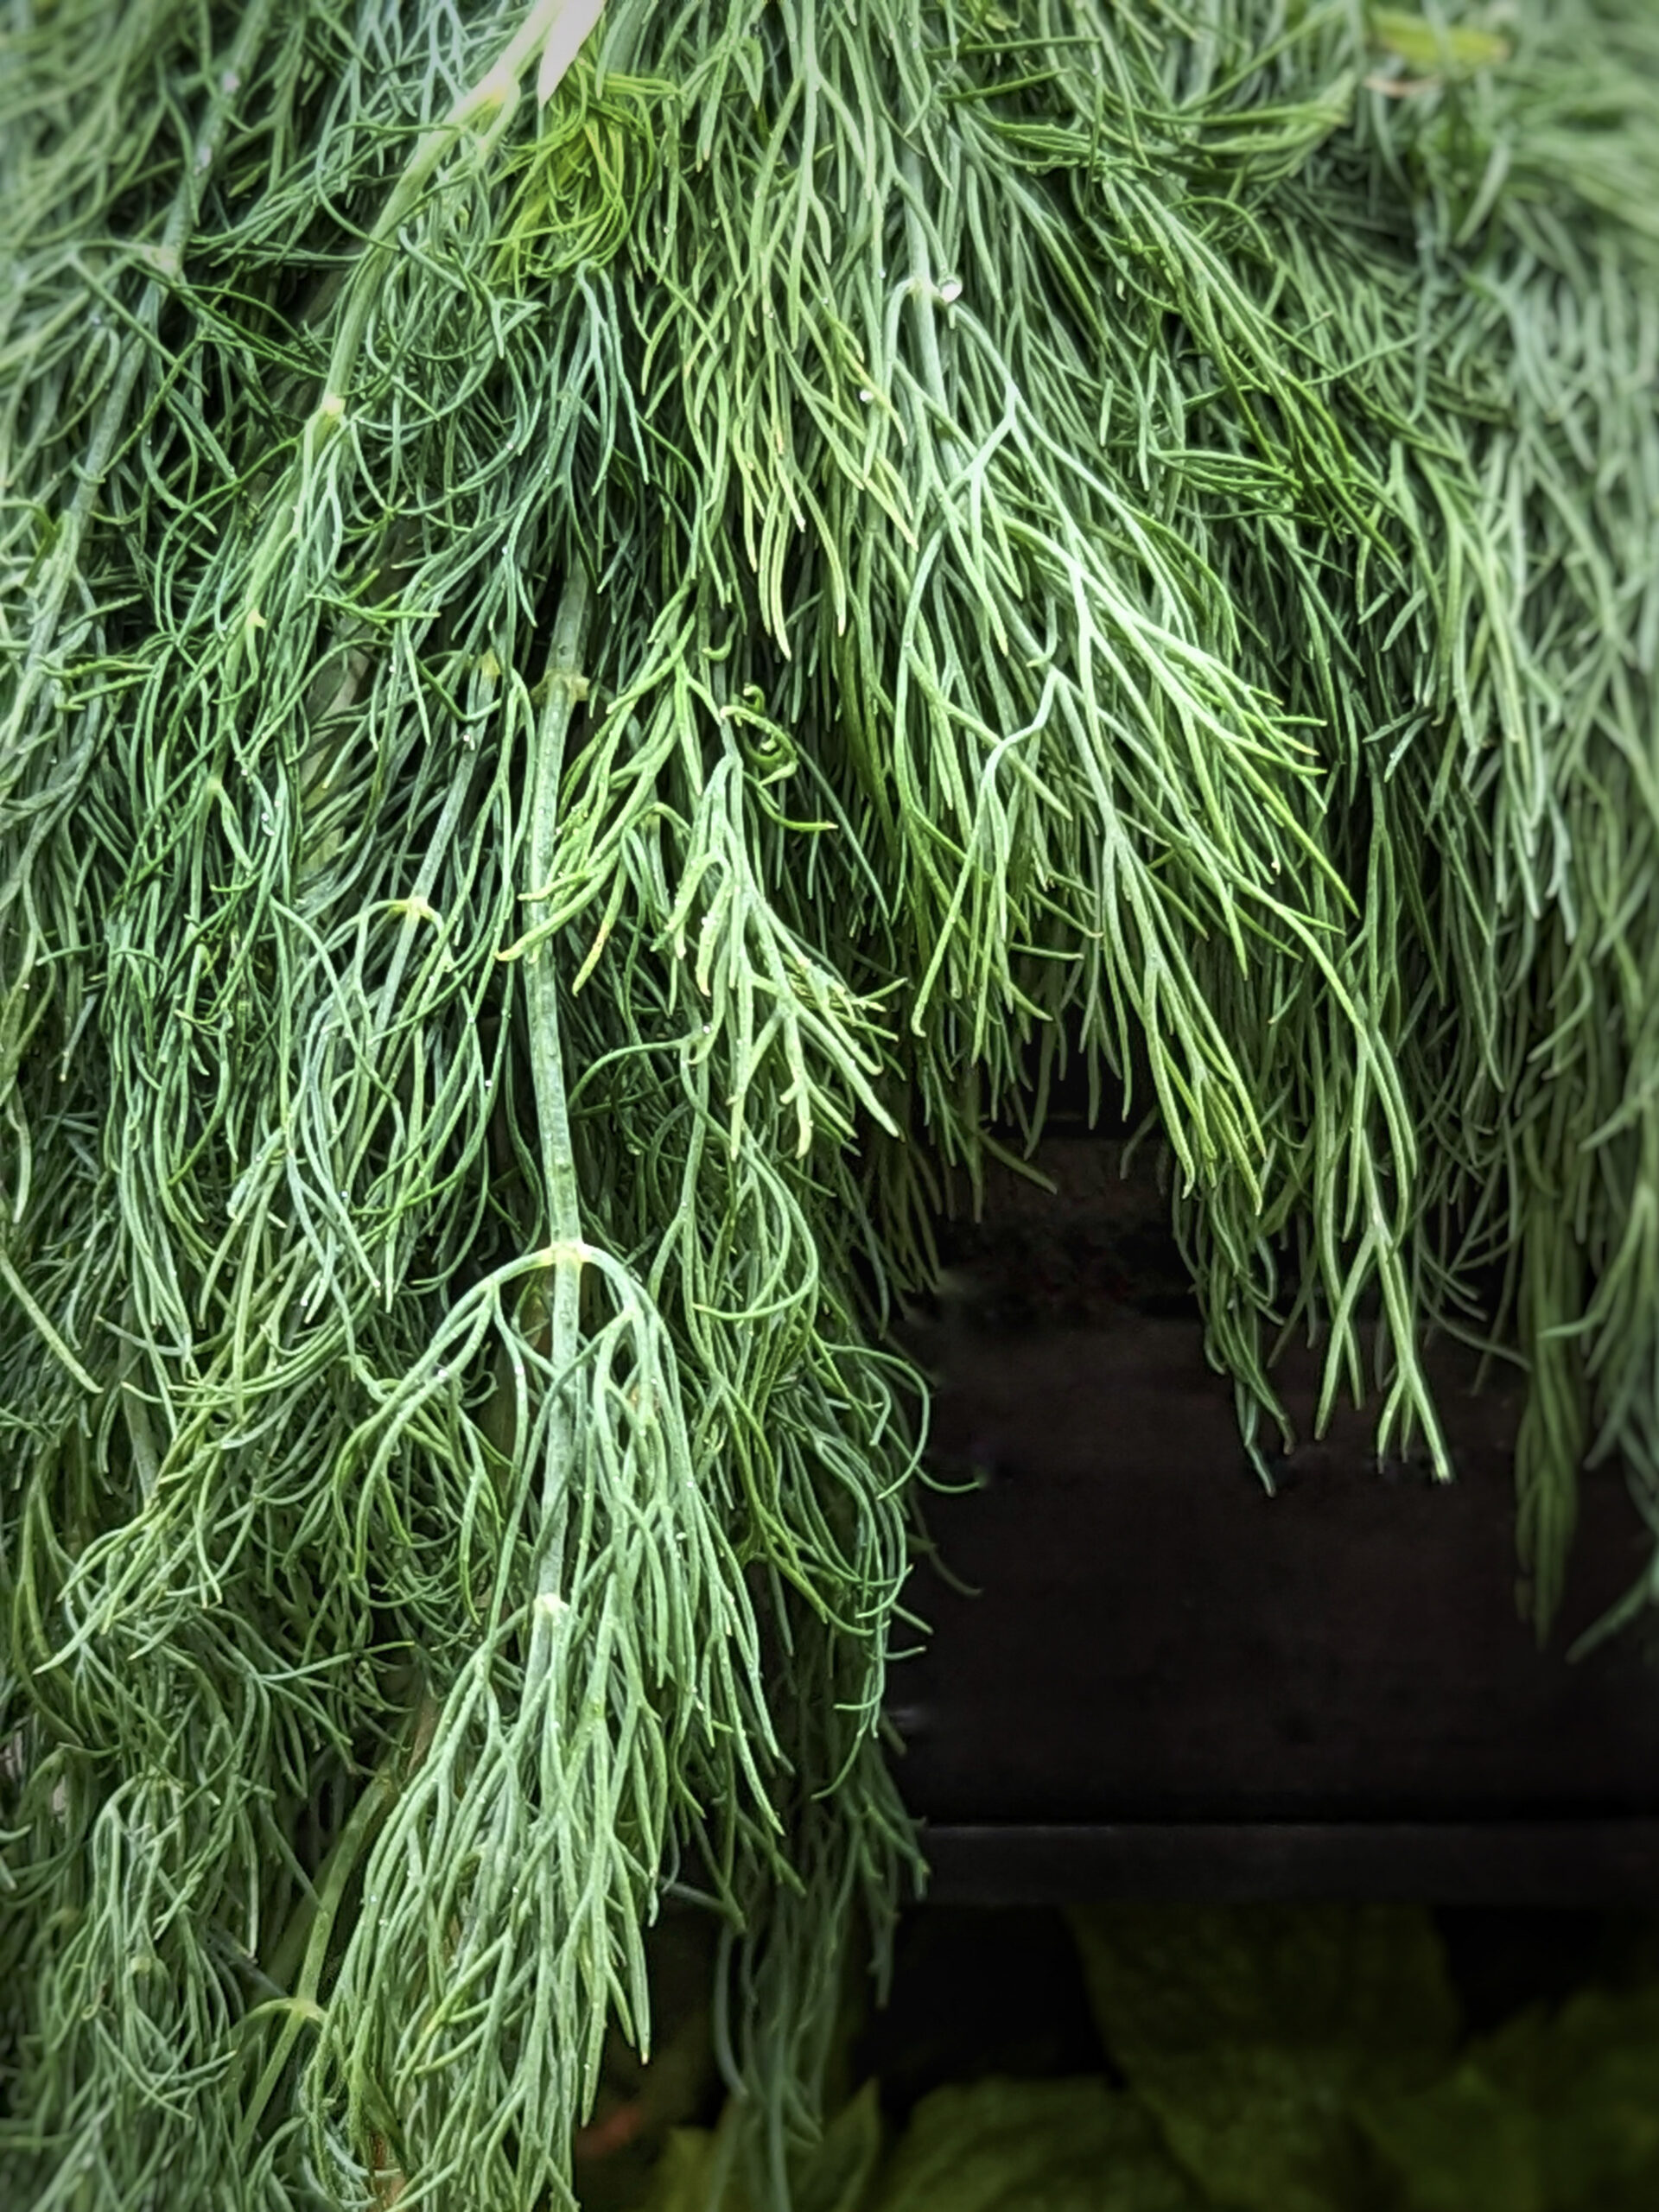 A close up of a dill plant.